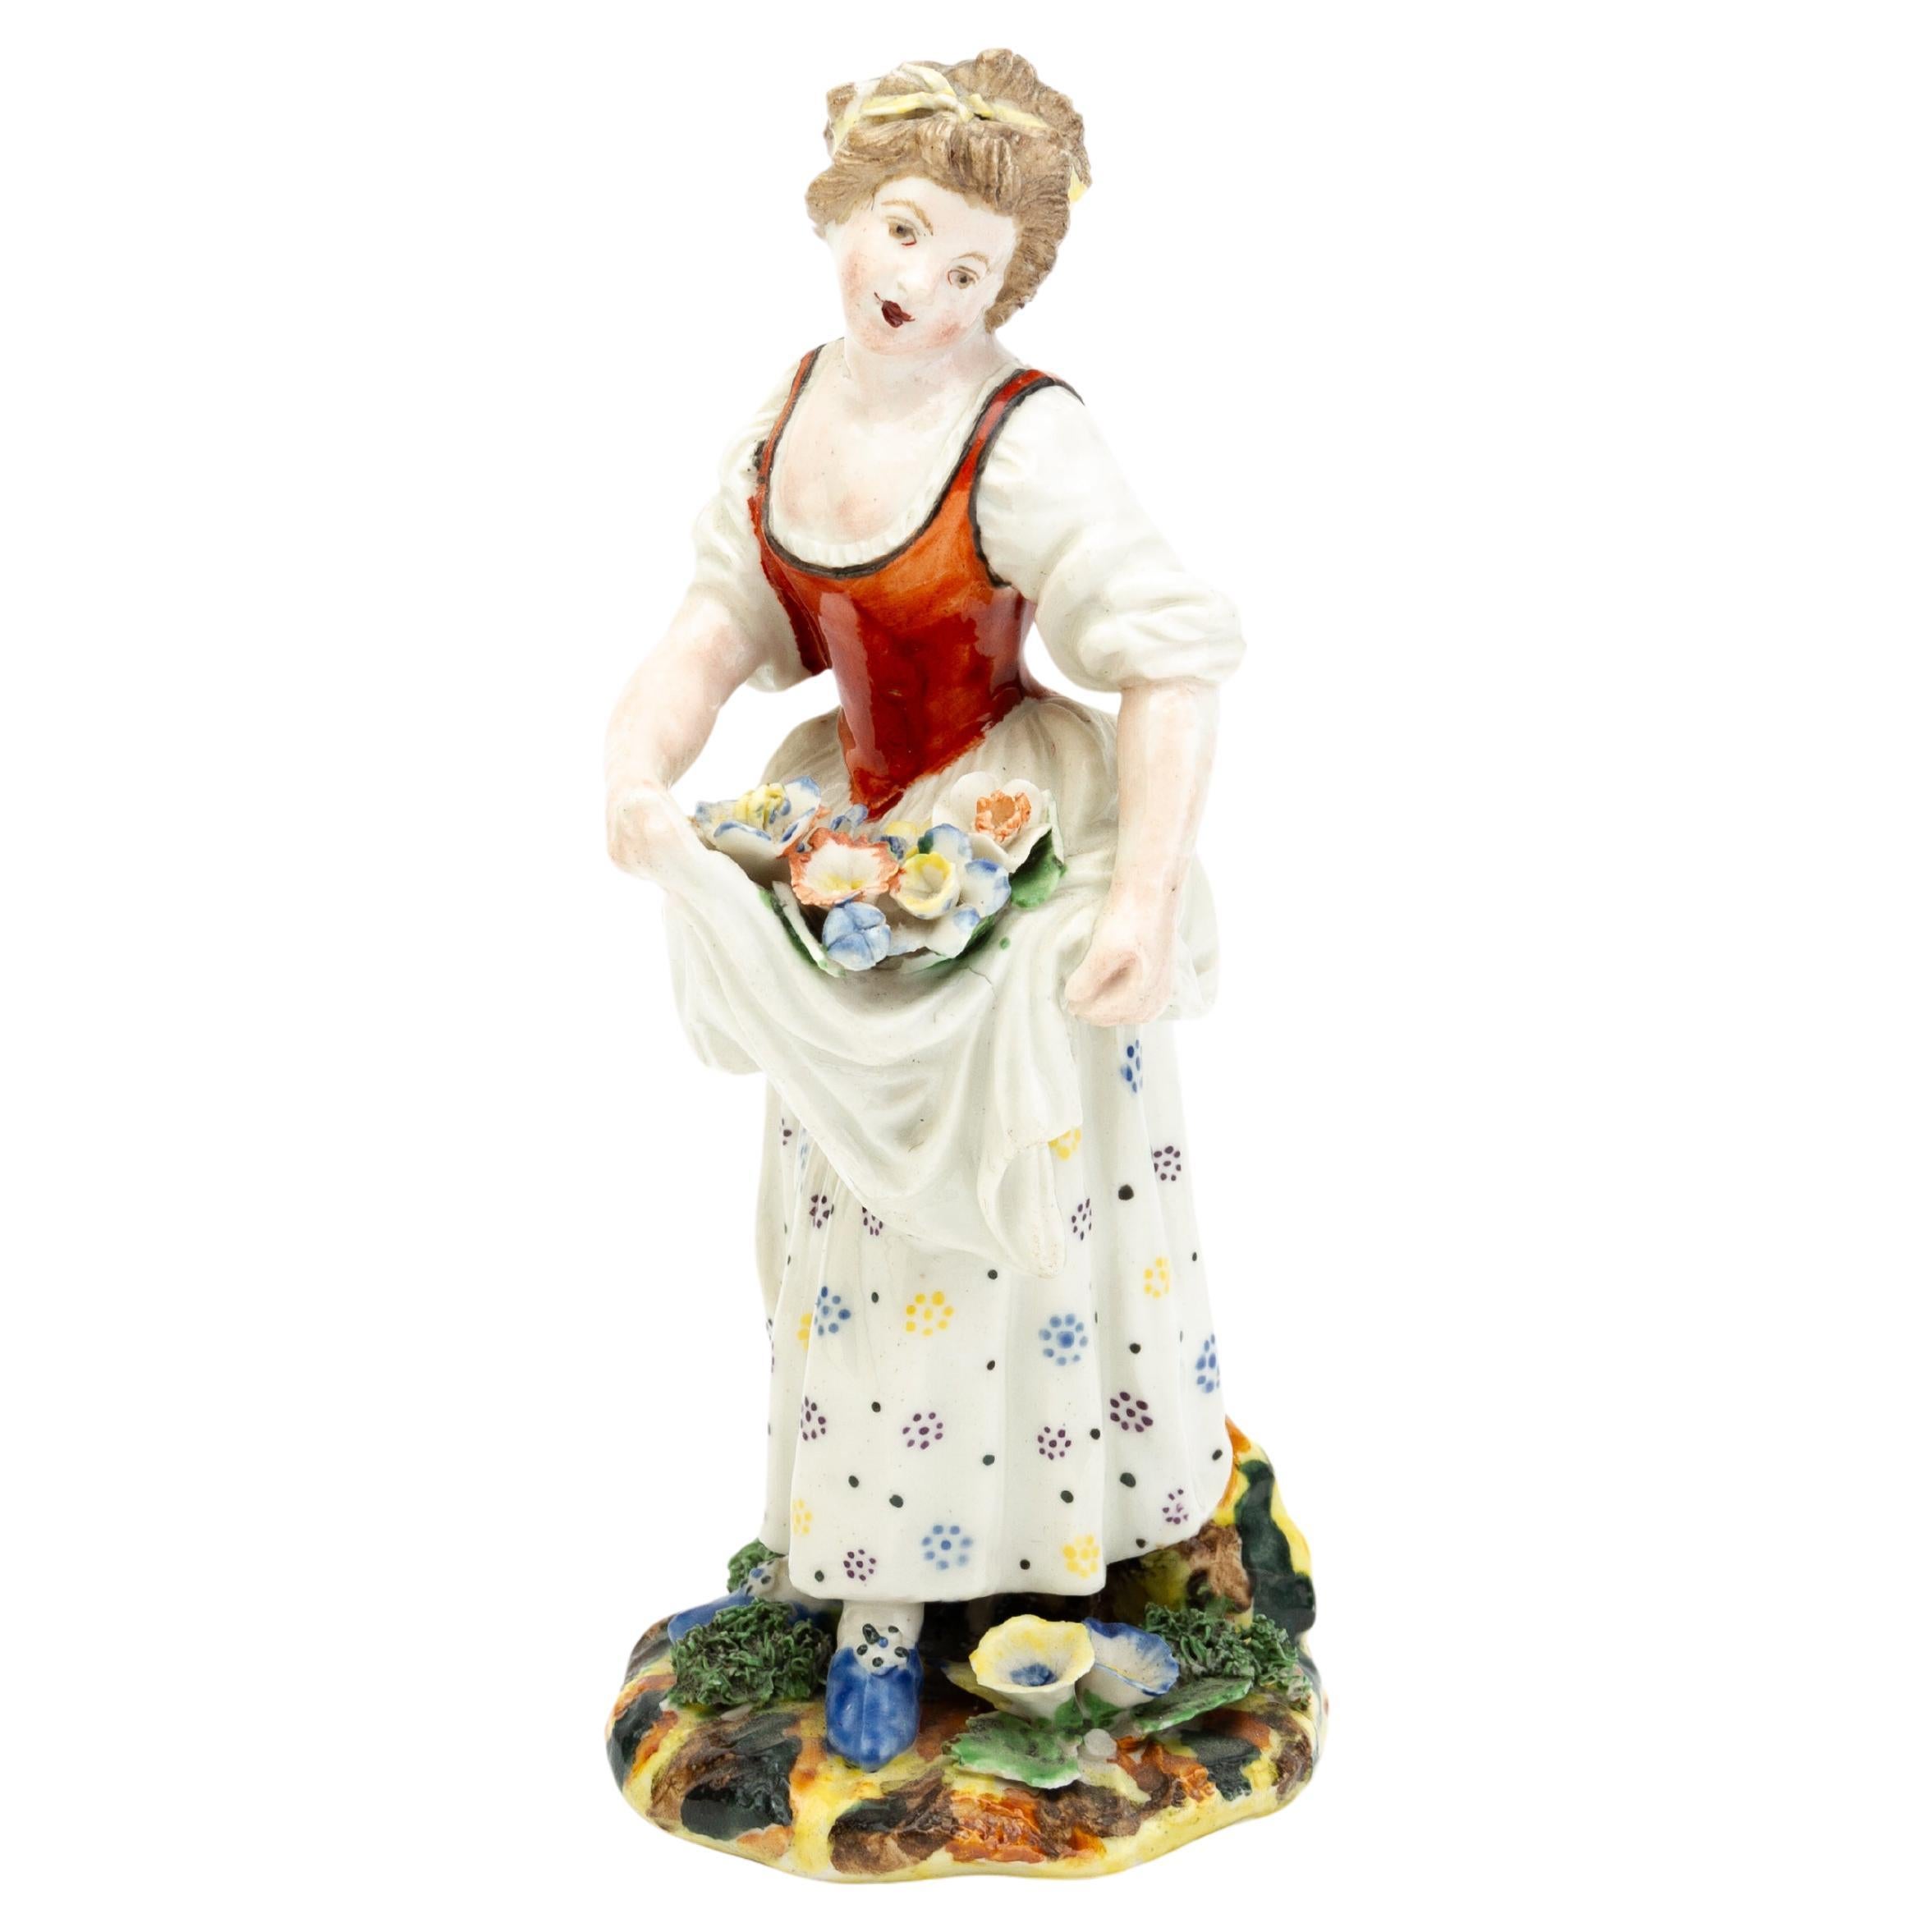 Polychrome Porcelain Figure of a Lady Collecting Flowers 19th Century